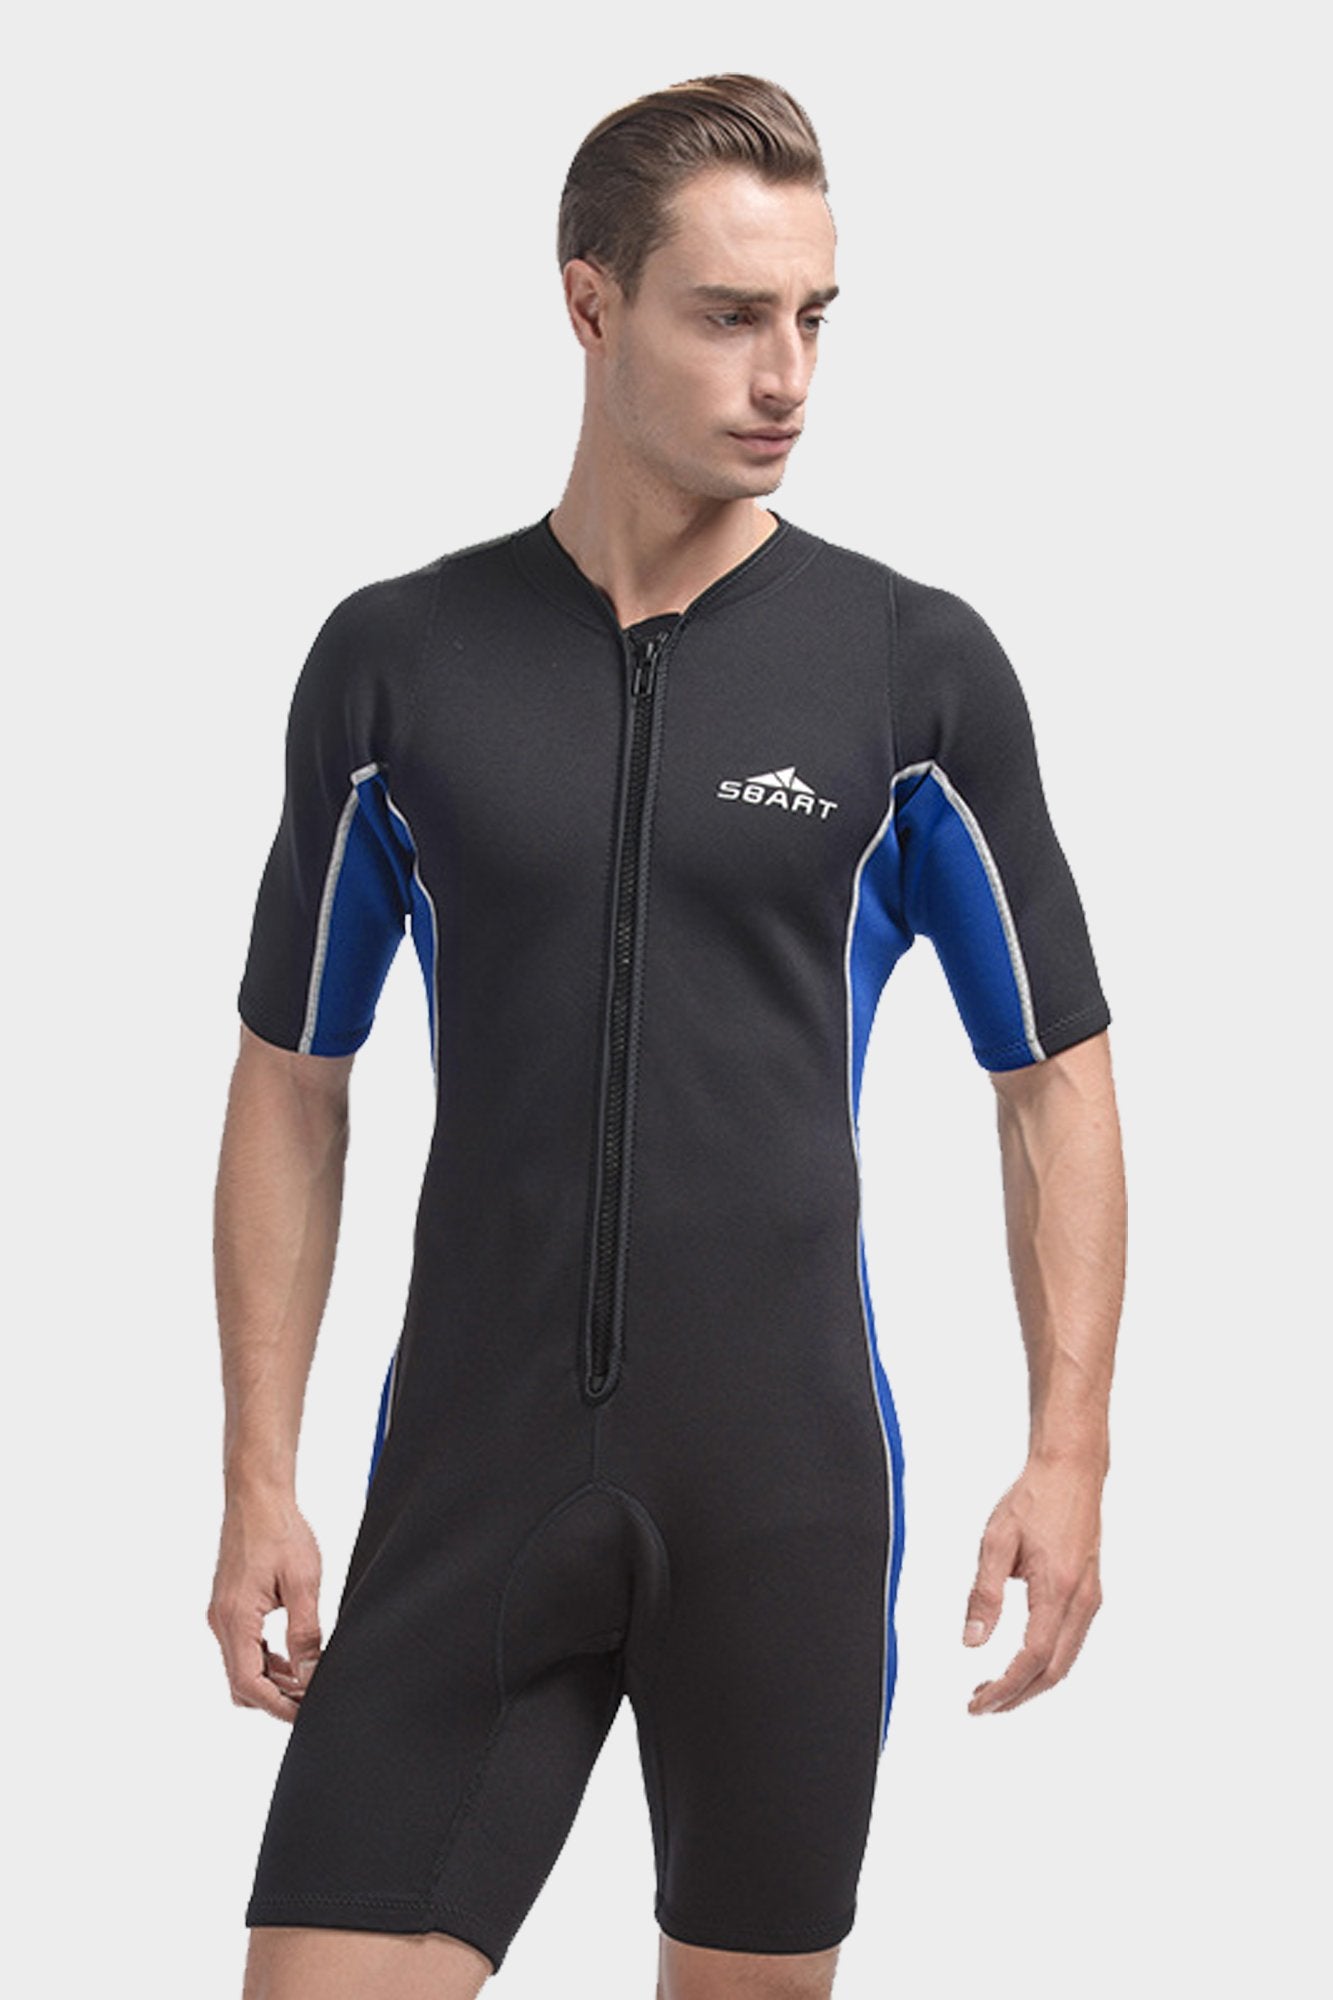 Attraco UPF50+ Color Block Neoprene One Piece Surfing Wetsuit-Attraco | Fashion Outdoor Clothing